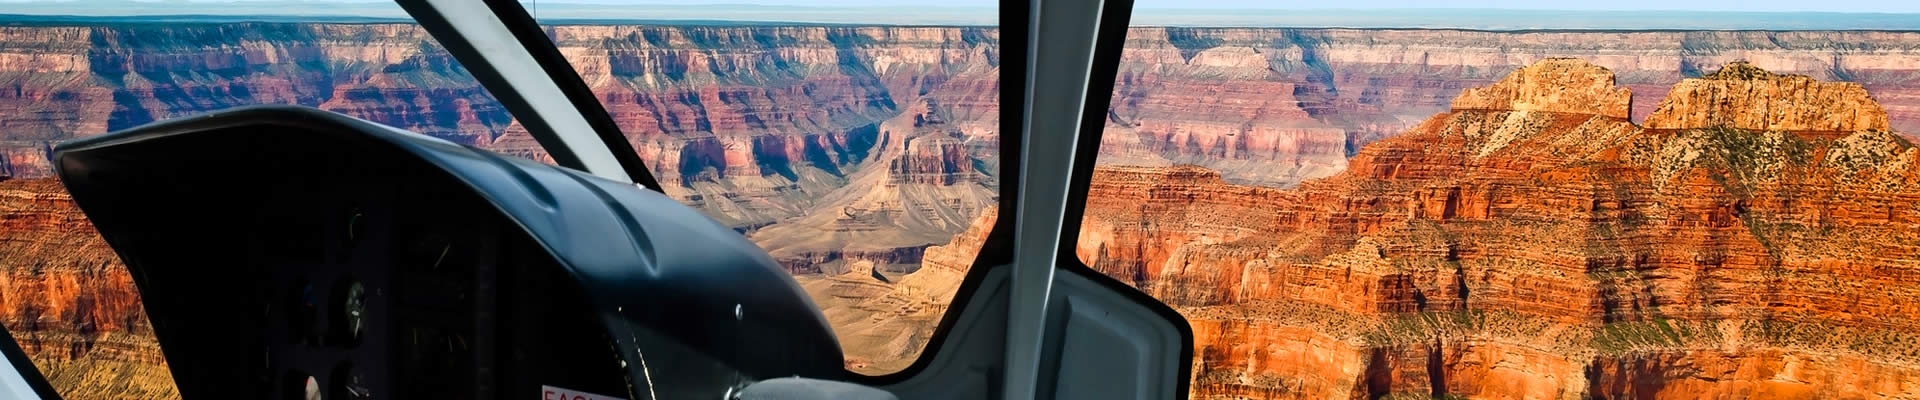 Discount Grand Canyon helicopter tours